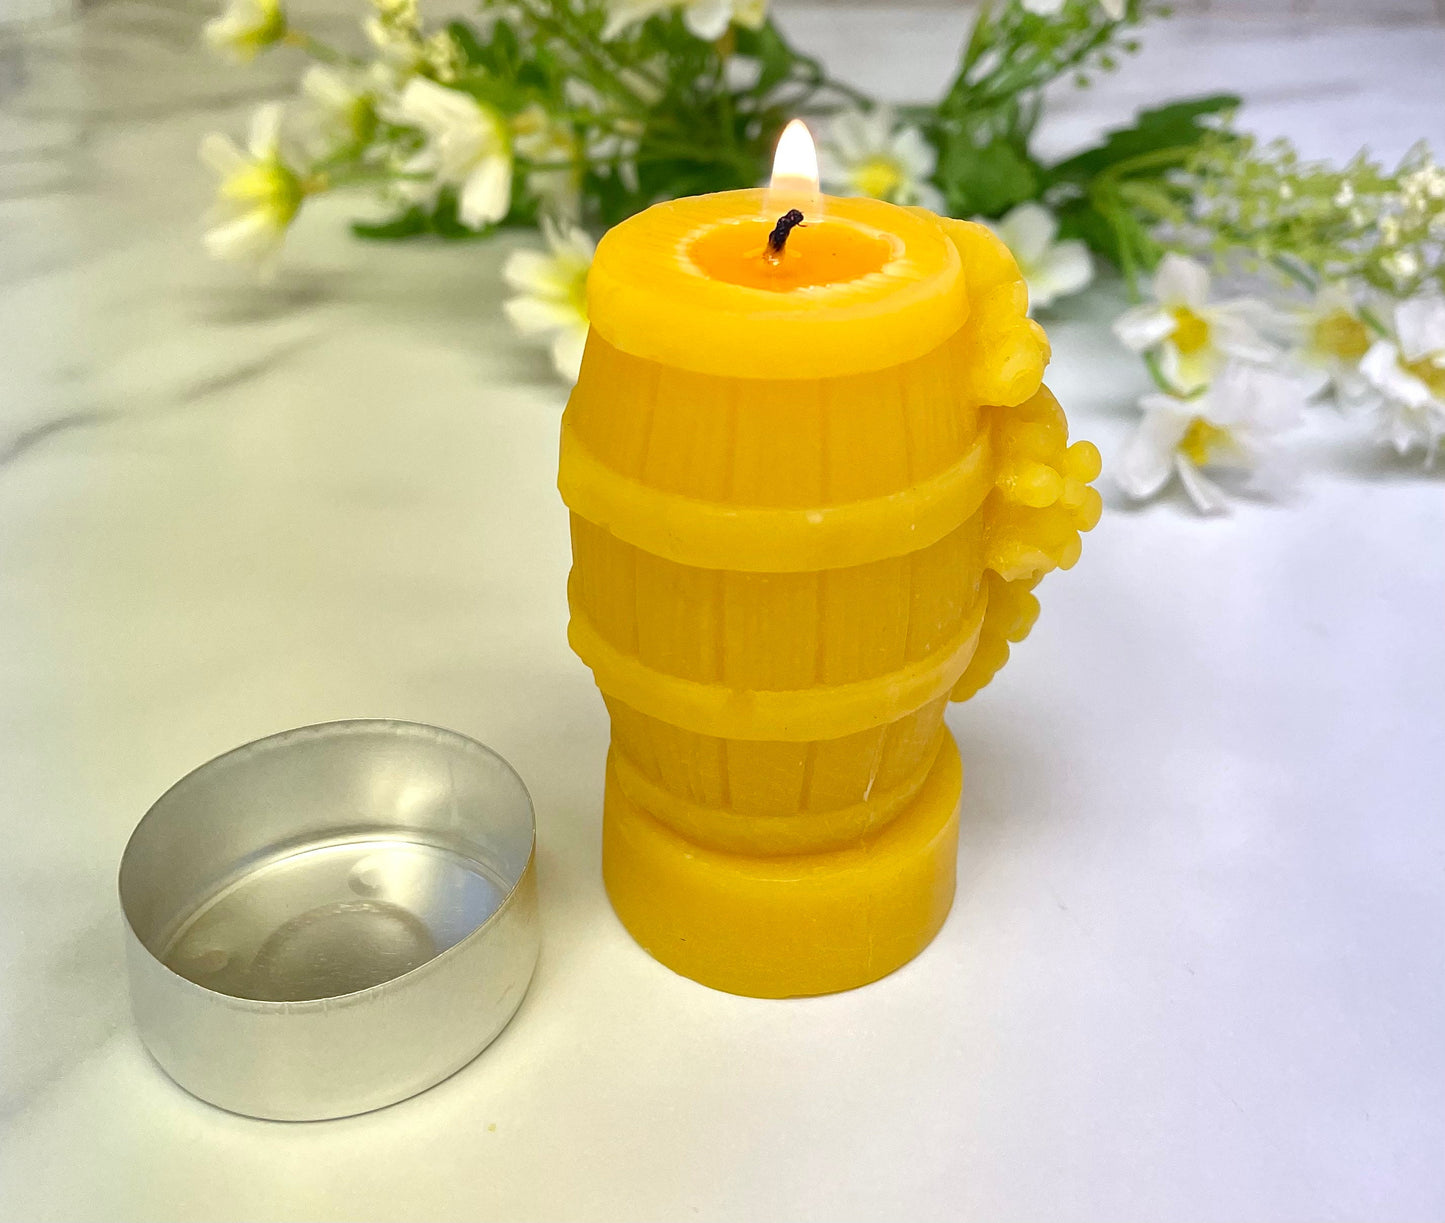 Silicone pillar tealight candle mold - grapes on wine barrel - wine tasting event